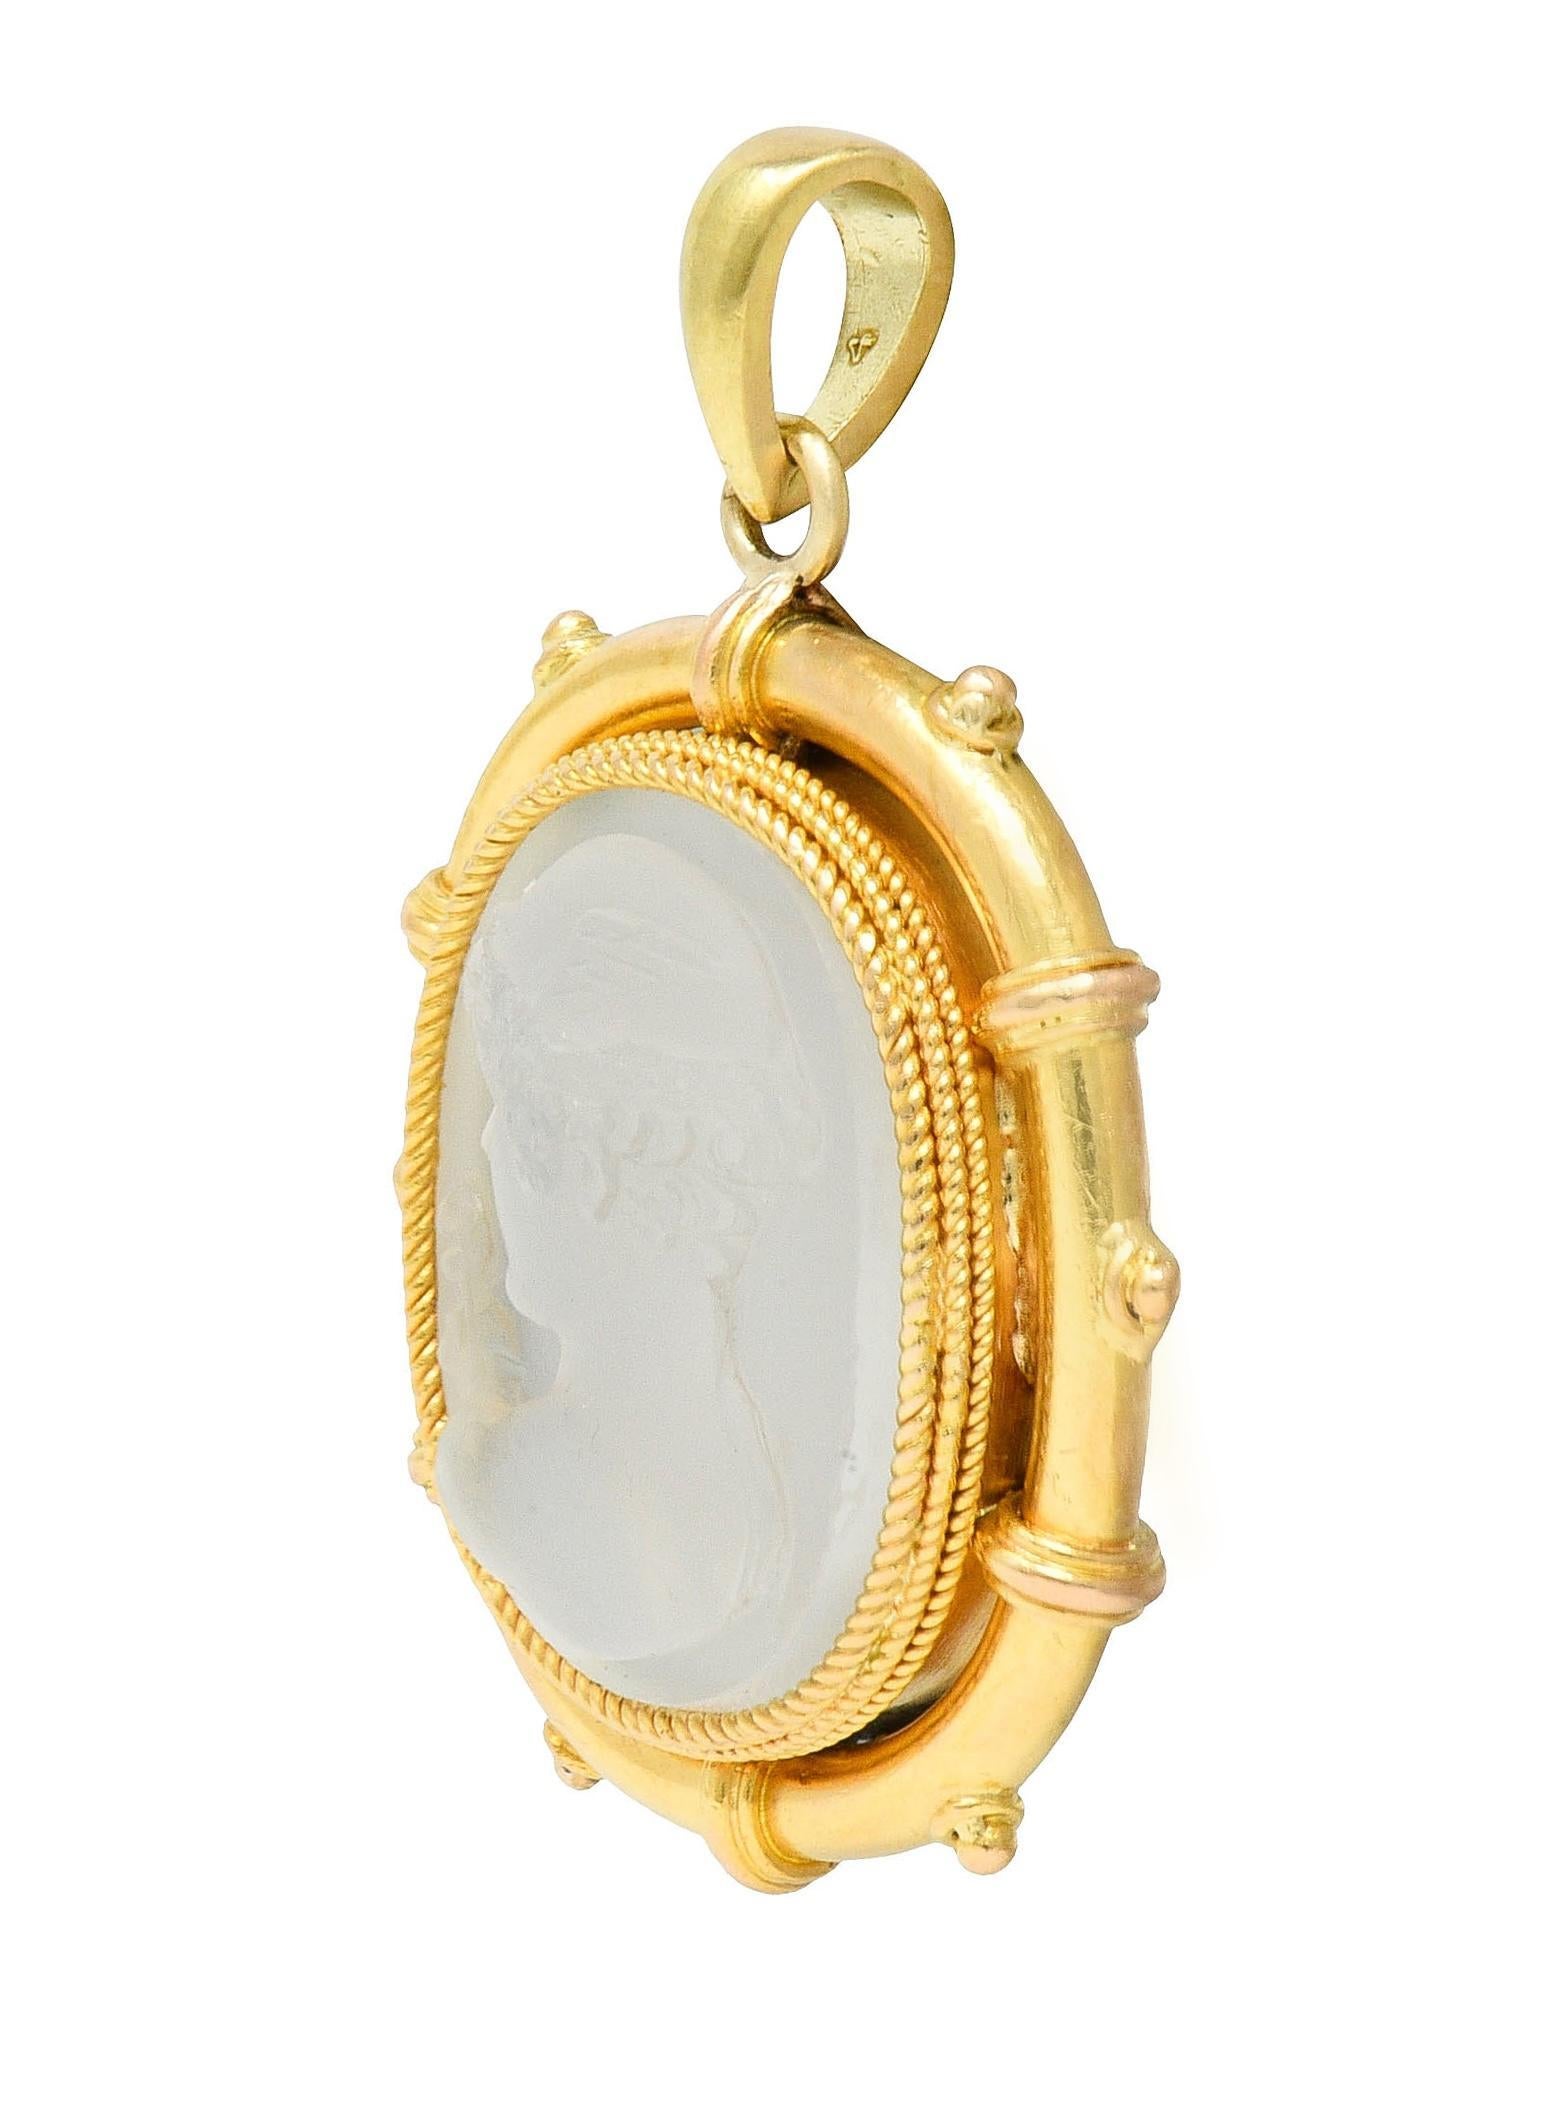 Centering a cushion-shaped moonstone tablet measuring 13.0 x 16.5 mm - carved with cameo
Depicting a cameo of the Greek god, Hermes wearing a winged helmet and with caduceus
Translucent colorless body displaying white adularescence - bezel set
With